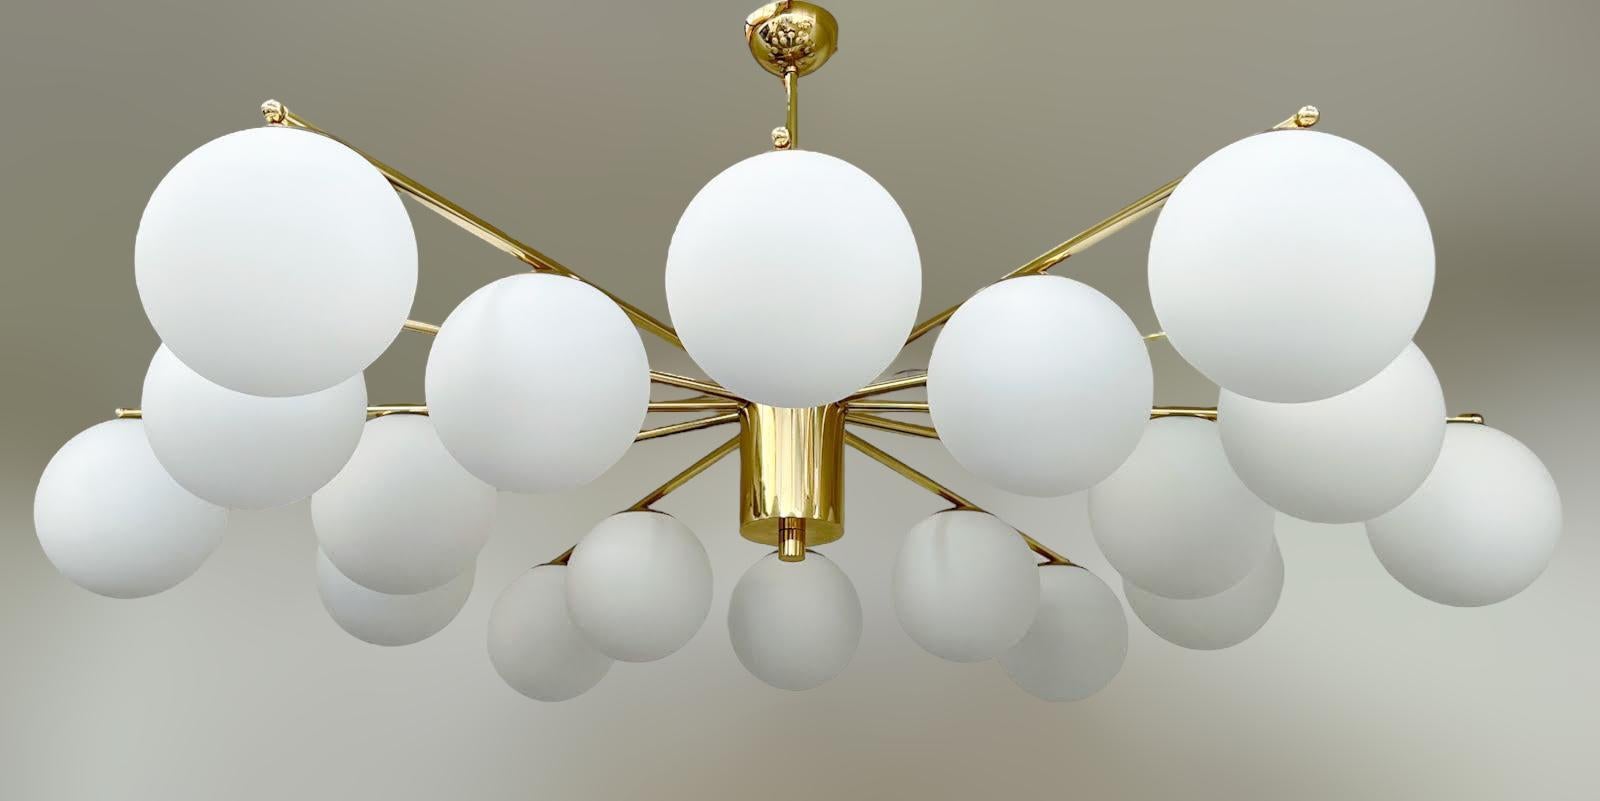 Italian chandelier with Murano globes mounted on solid brass frame / Made in Italy
Designed by Fabio Ltd, inspired by Angelo Lelli and Arredoluce styles
18 lights / E12 or E14 type / max 40W each 
Diameter: 65 inches / Height: 27 inches including